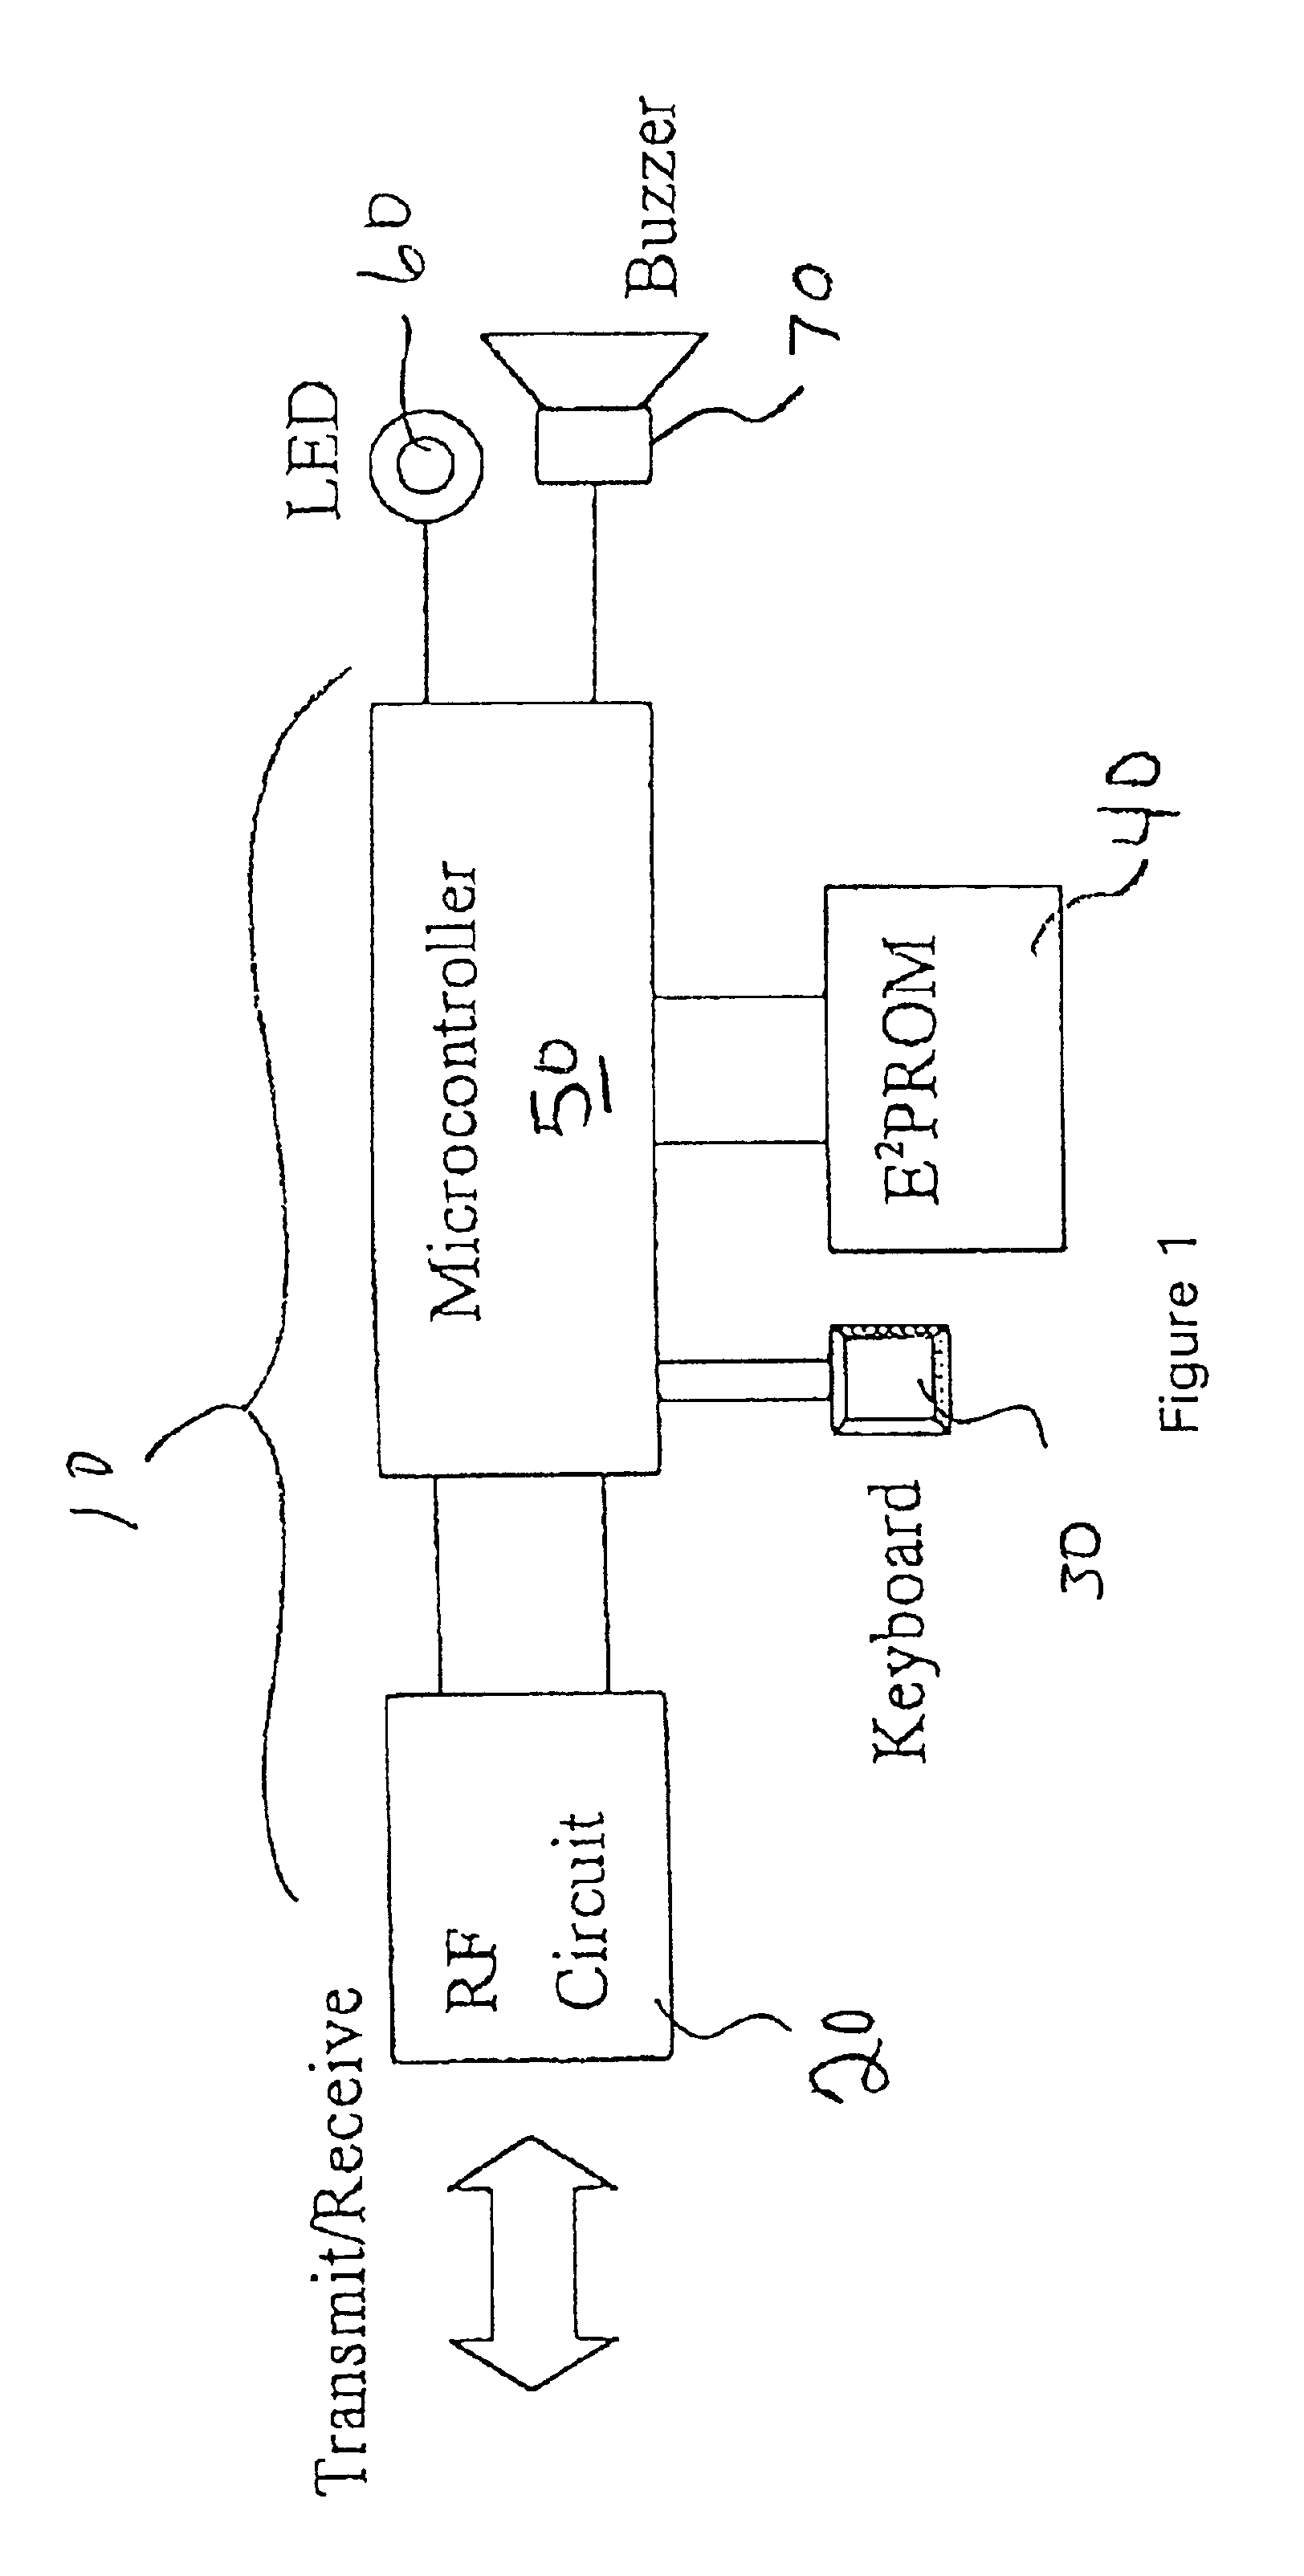 Expandable object tracking system and devices